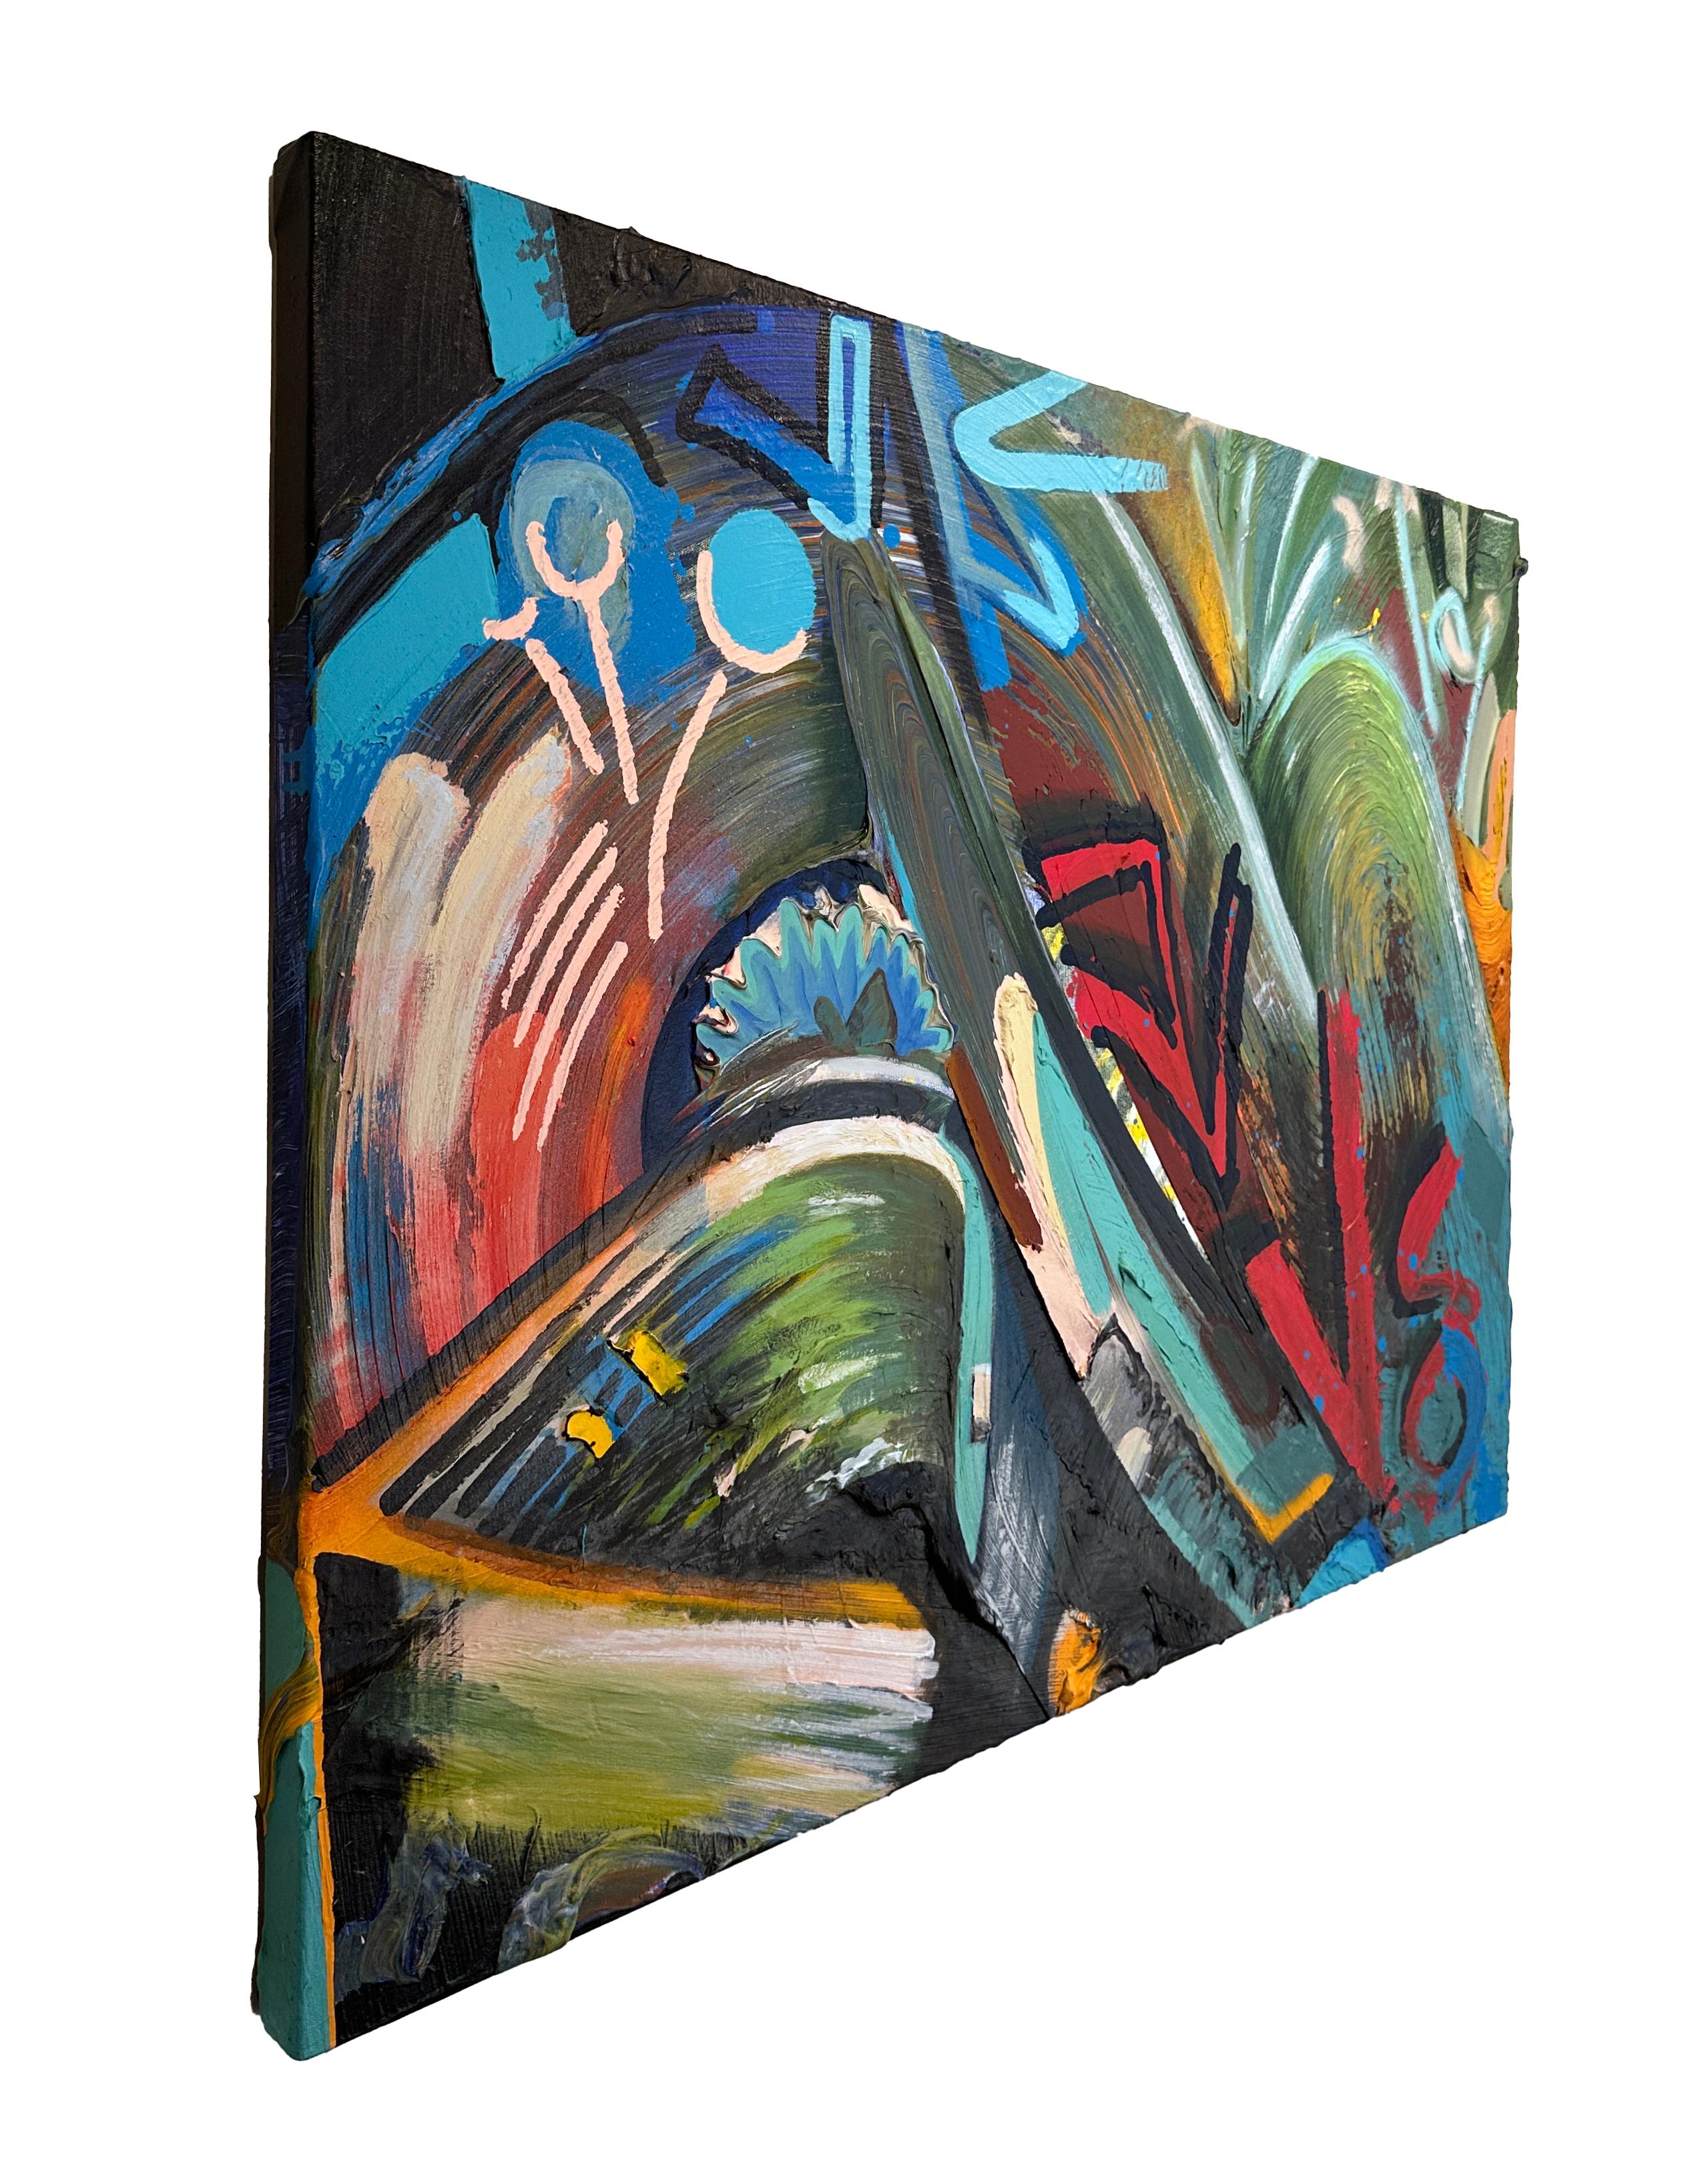 Waves - Abstract Expressionism, Graffiti Style Painting, Bright Colors - Black Abstract Painting by Connor Hughes